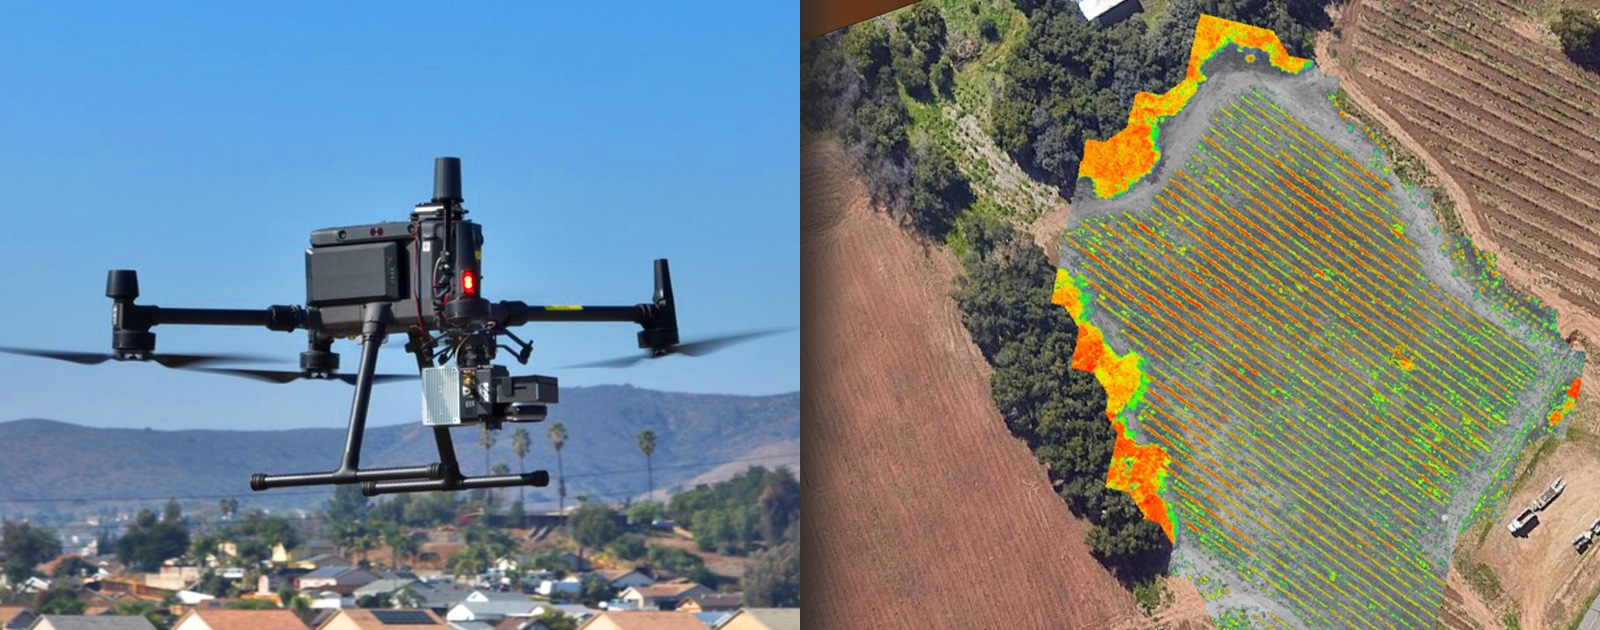 split screen with an aerial drone on the left and thermal imaging of the ground on the right.